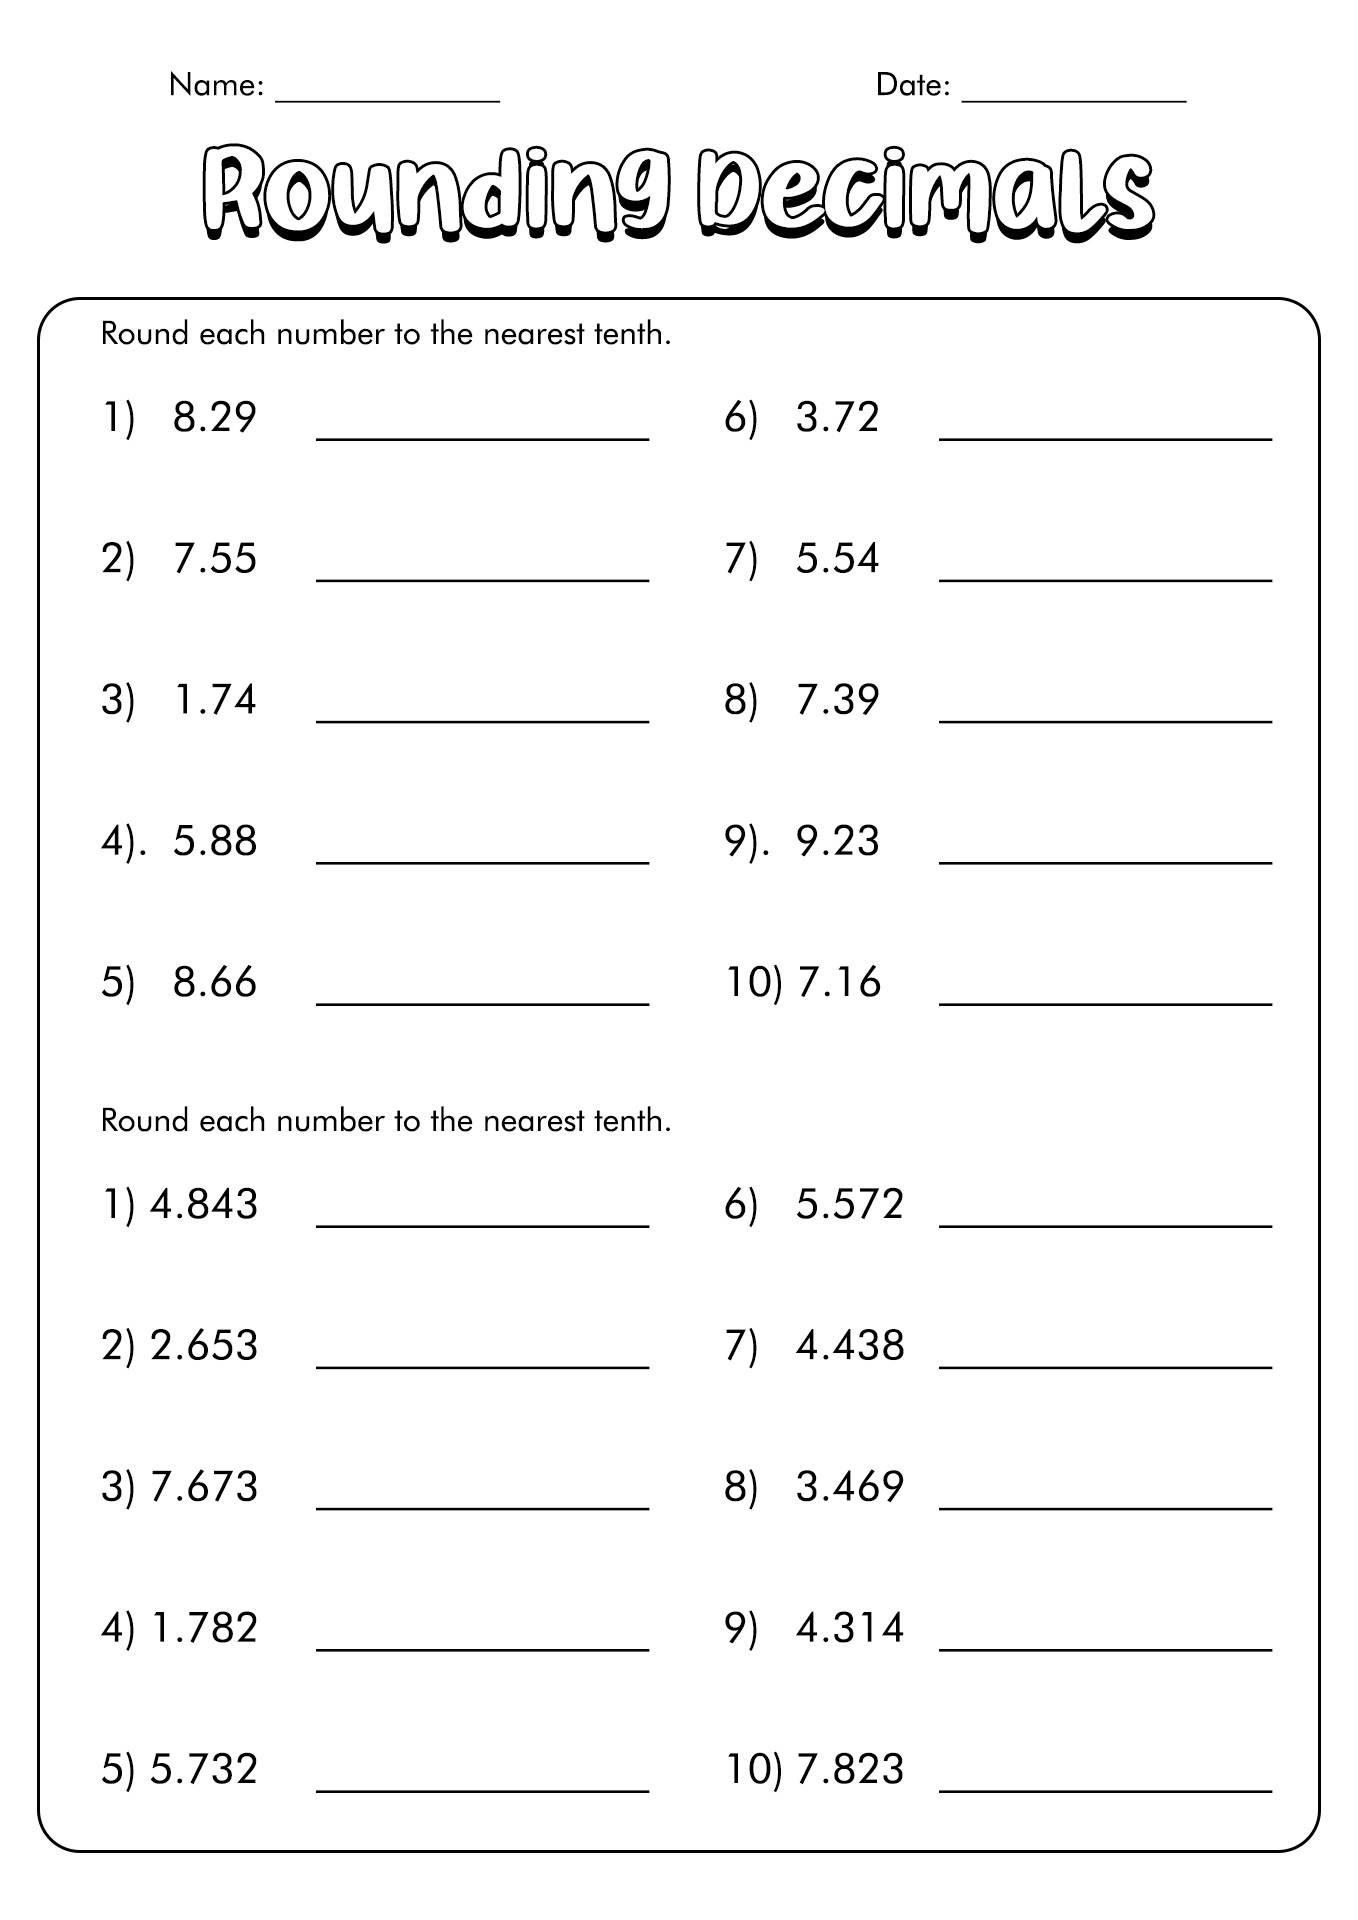 rounding-whole-numbers-worksheets-4th-grade